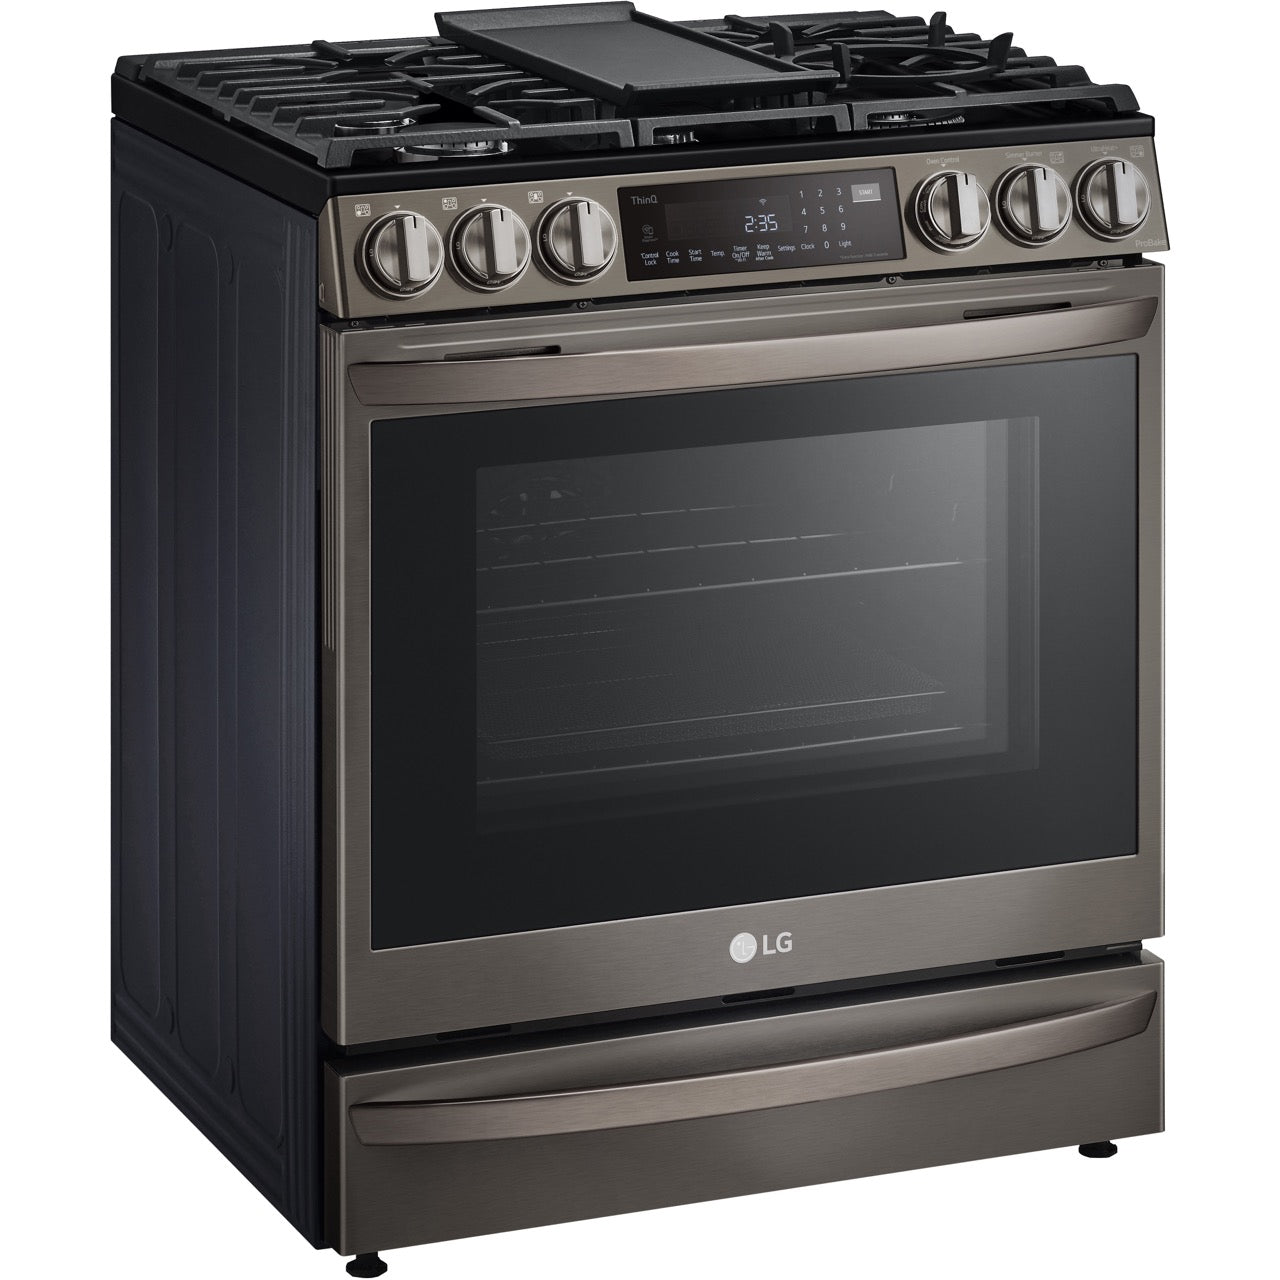 LG 6.3-Cu. Ft. Smart Wi-Fi Enabled ProBake Convection InstaView Gas Slide-in Range with Air Fry, Black Stainless Steel (LSGL6337D)